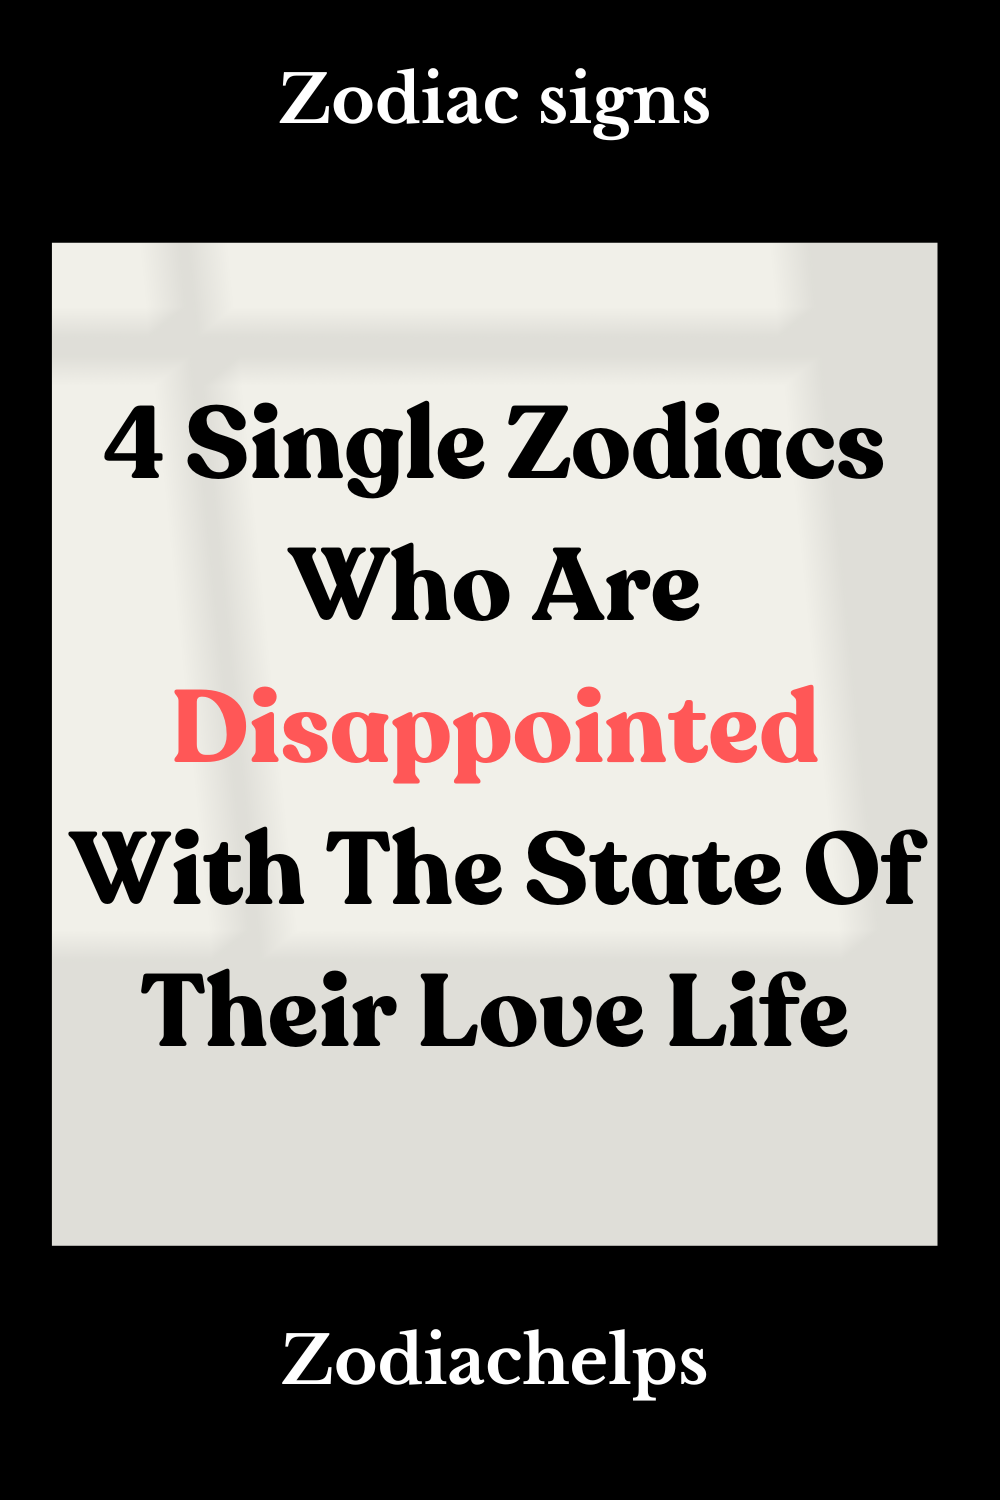 4 Single Zodiacs Who Are Disappointed With The State Of Their Love Life